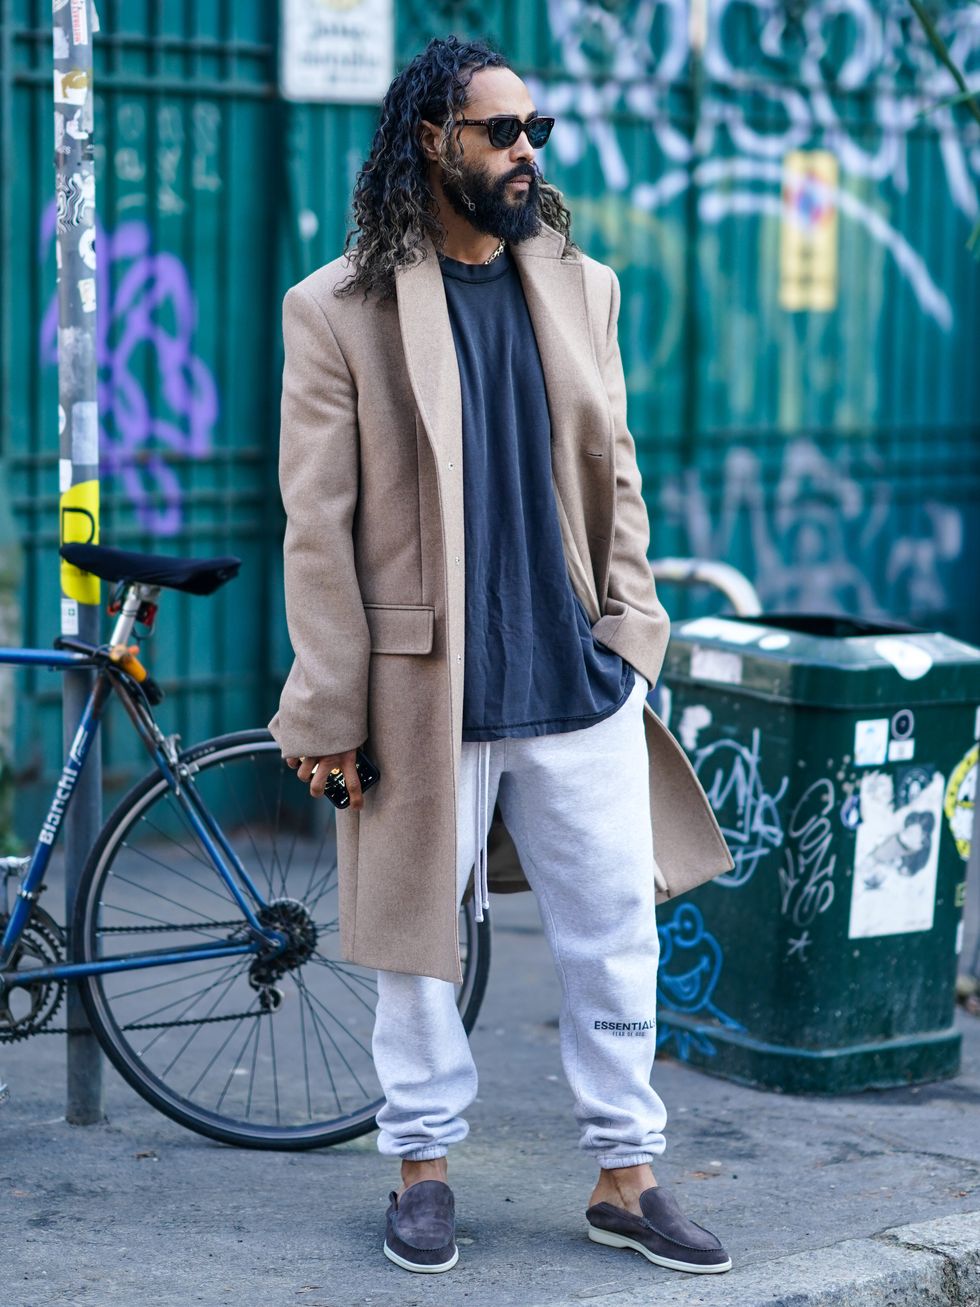 milan, italy   january 11  jerry lorenzo wears sunglasses, a beige long coat, a gray t shirt, white "essential fear of god" sportswear pants, suede shoes, outside marni, during milan fashion week fallwinter 20202021, on january 11, 2020 in milan, italy photo by edward berthelotgetty images